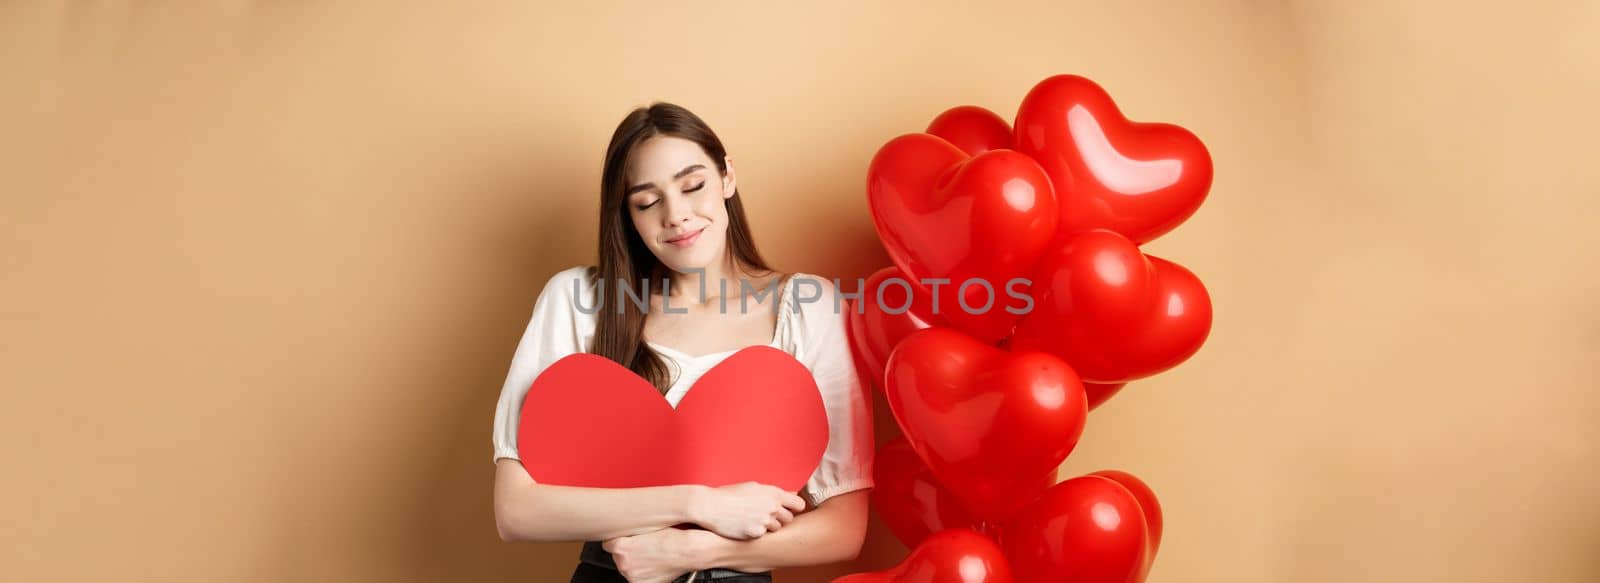 Romantic woman hugging big red heart and smiling dreamy, falling in love on Valentines day, dreaming about lover, standing on beige background near balloons.